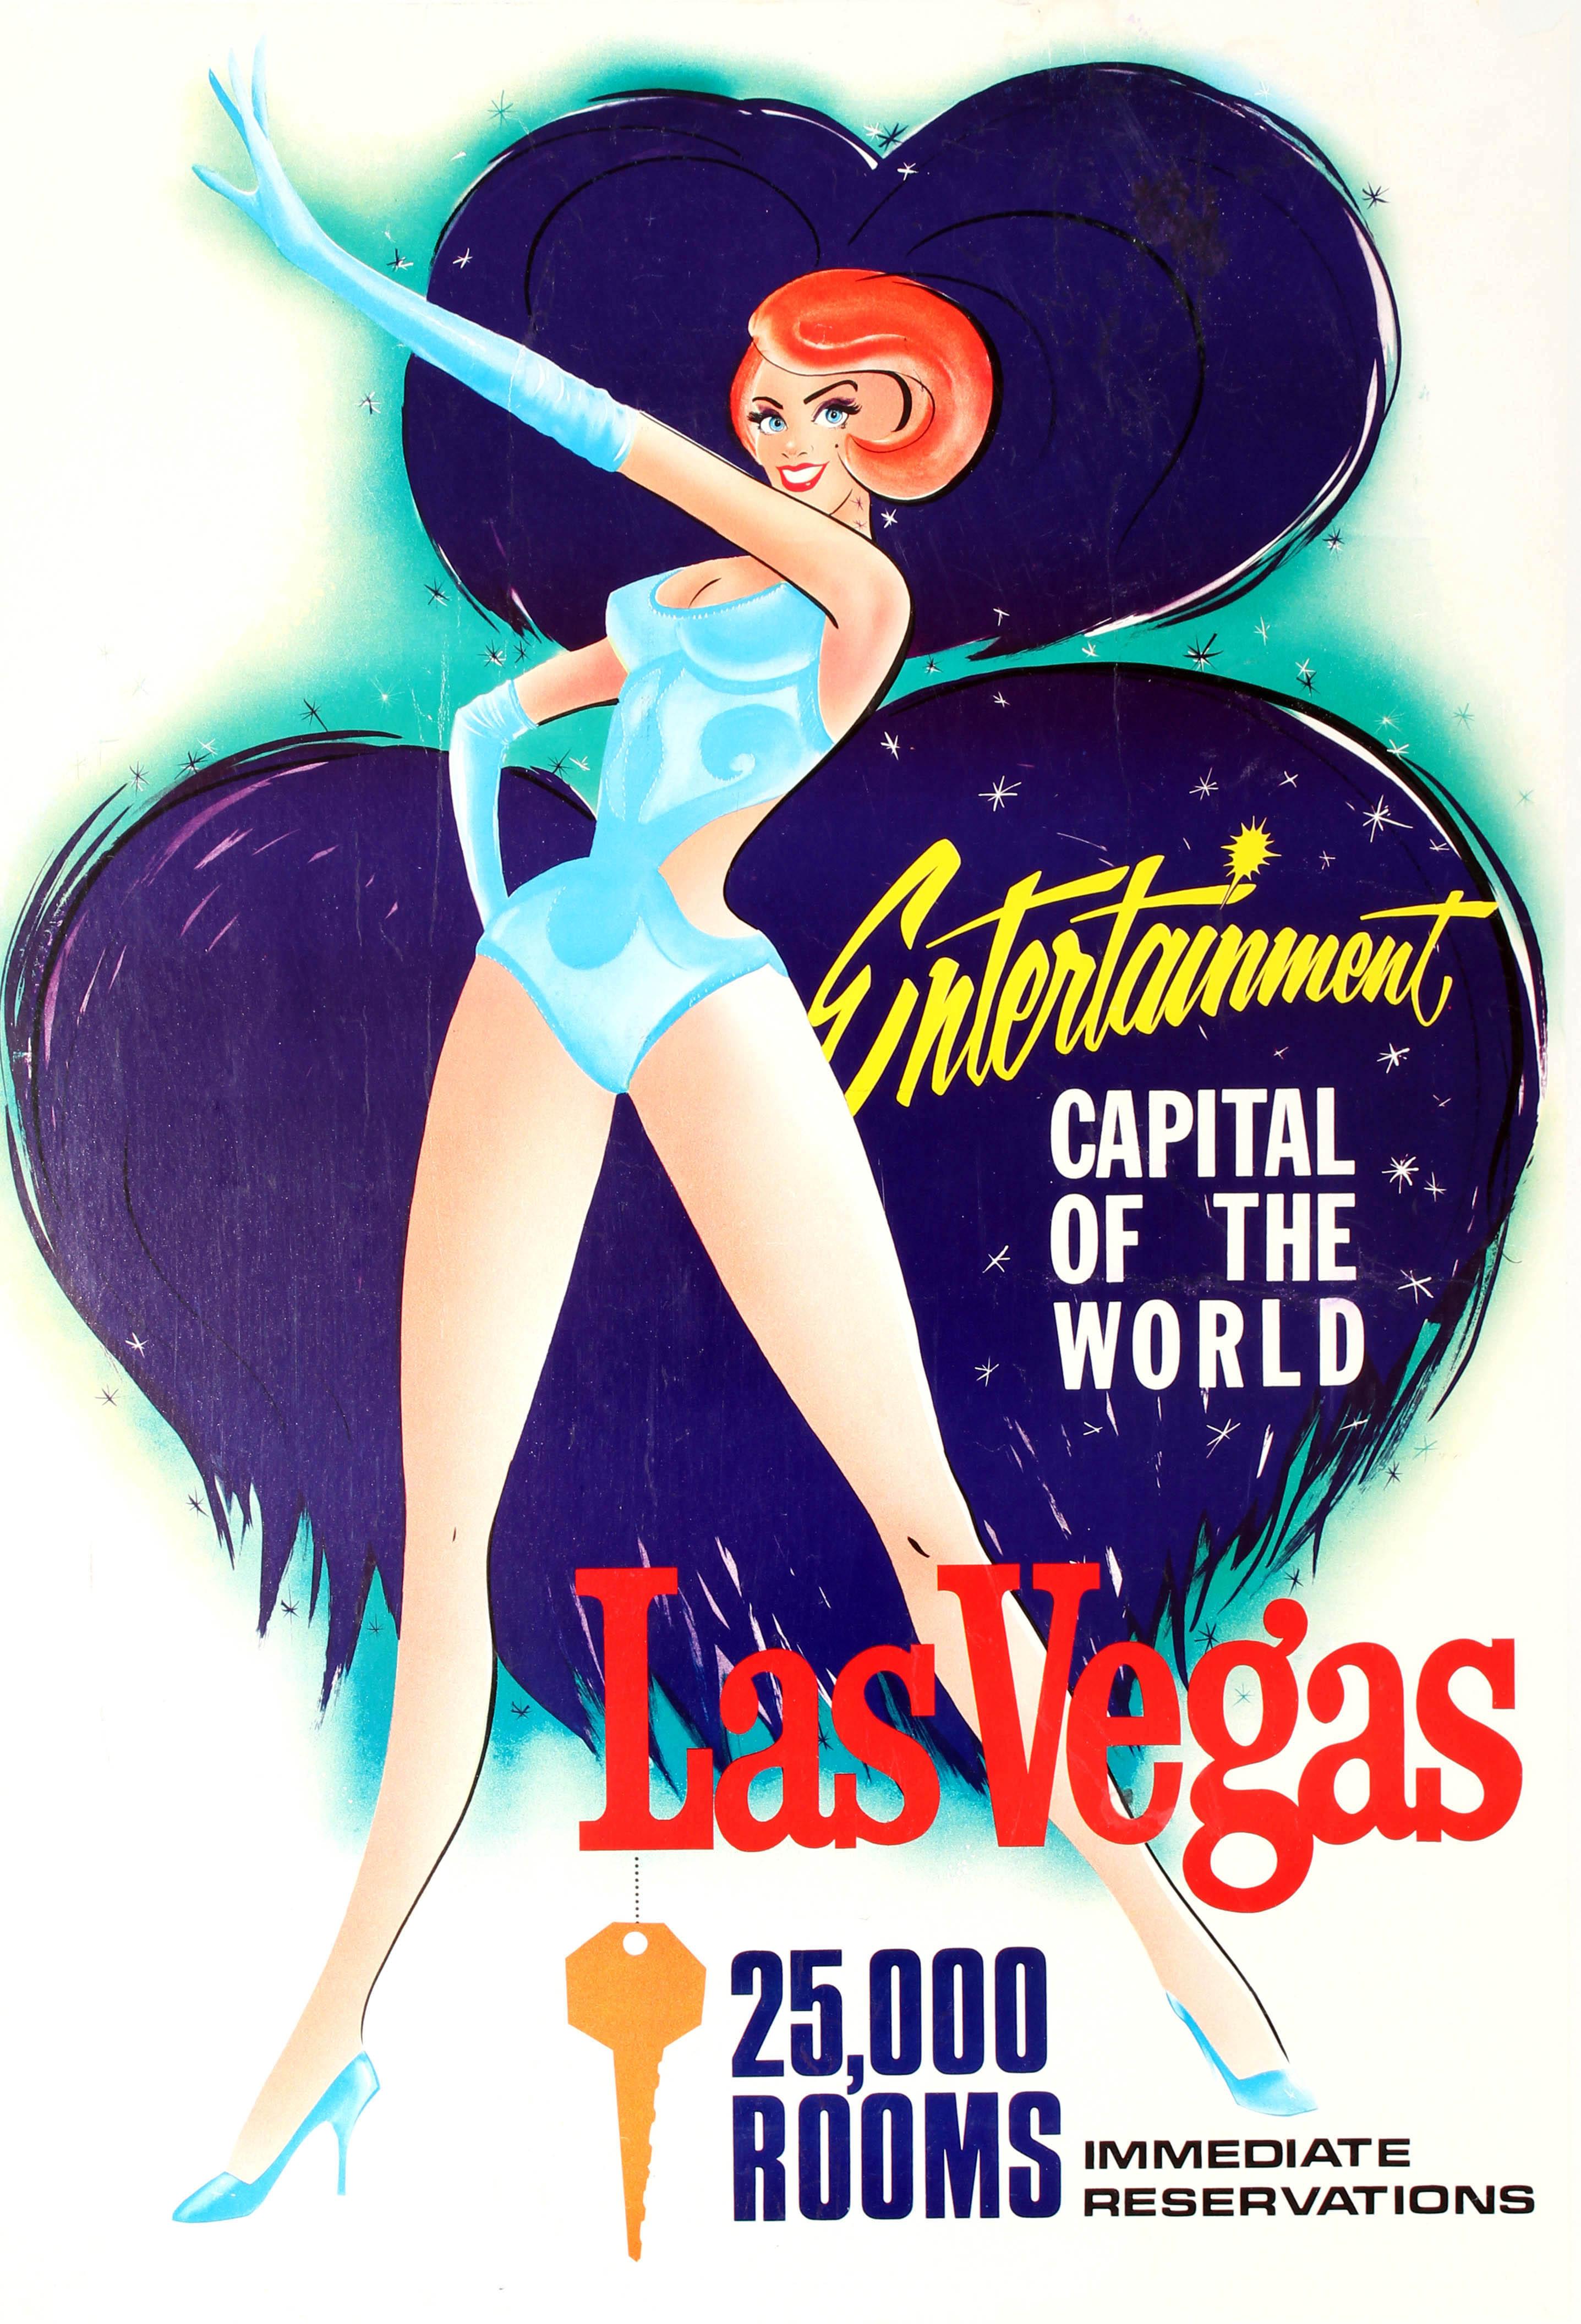 Unknown Print - Original Vintage Travel Poster For Las Vegas Entertainment Capital Of The World